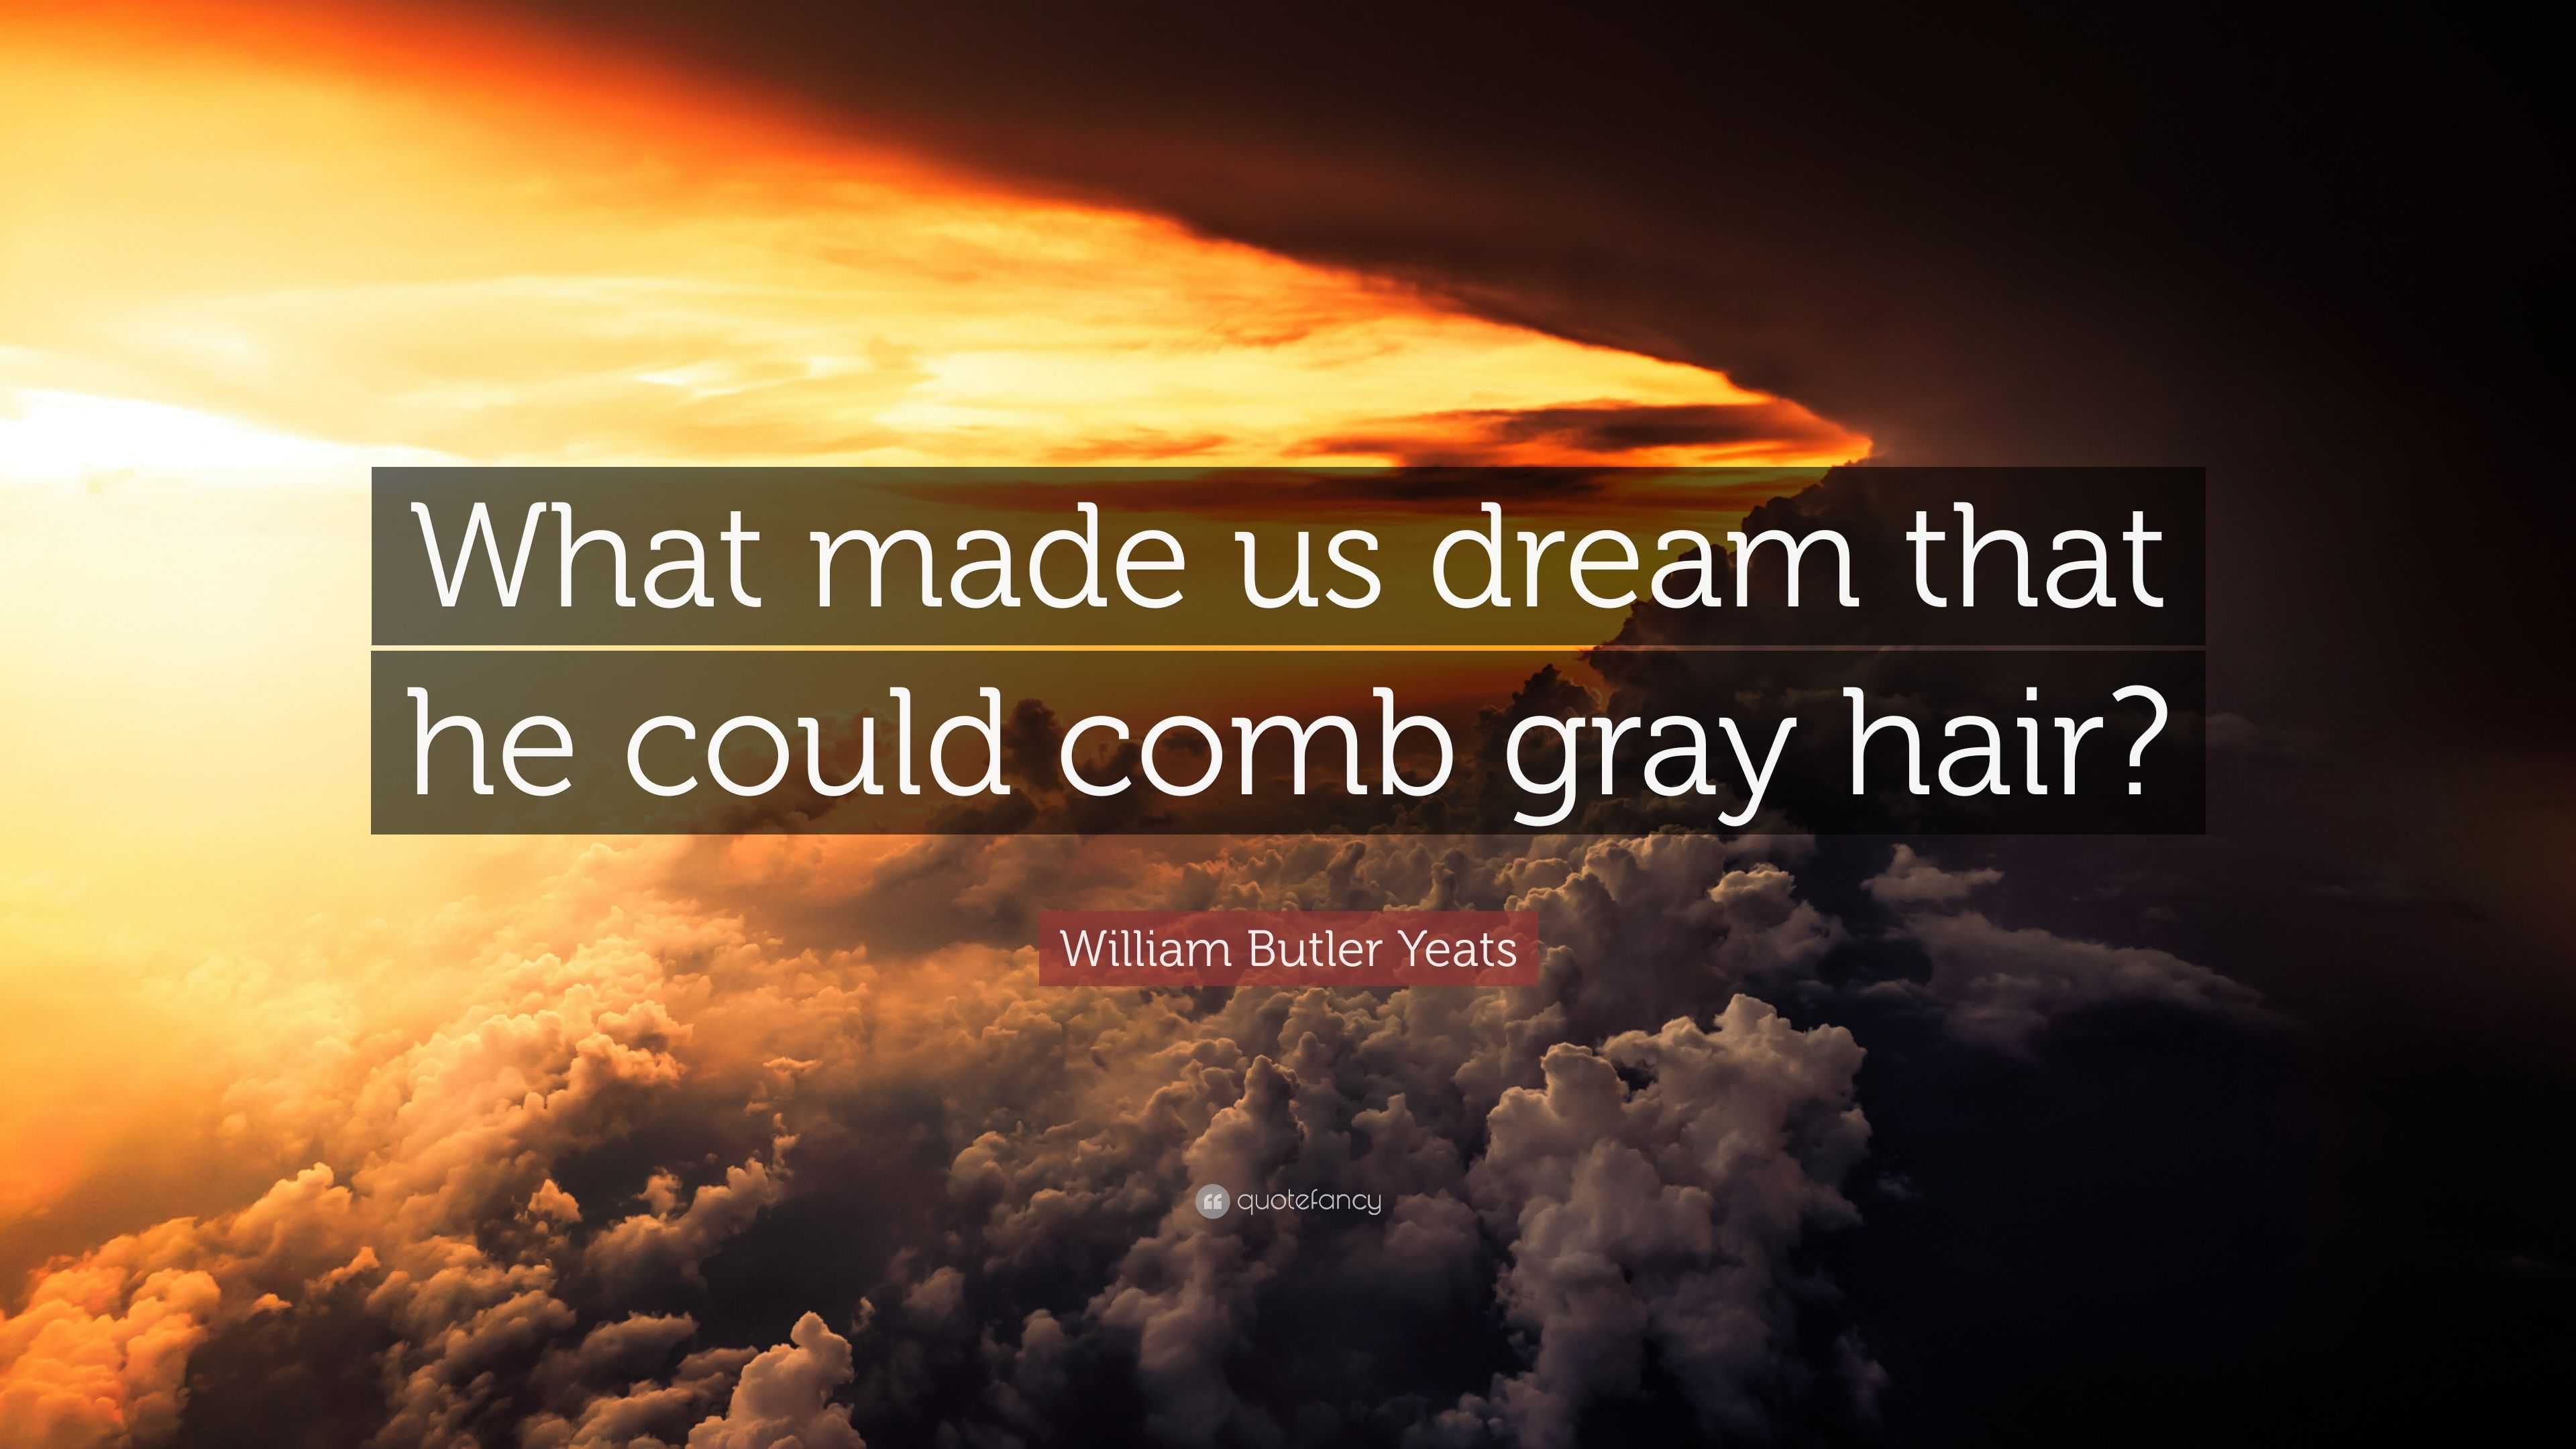 William Butler Yeats Quote: “What made us dream that he could comb gray hair ?”